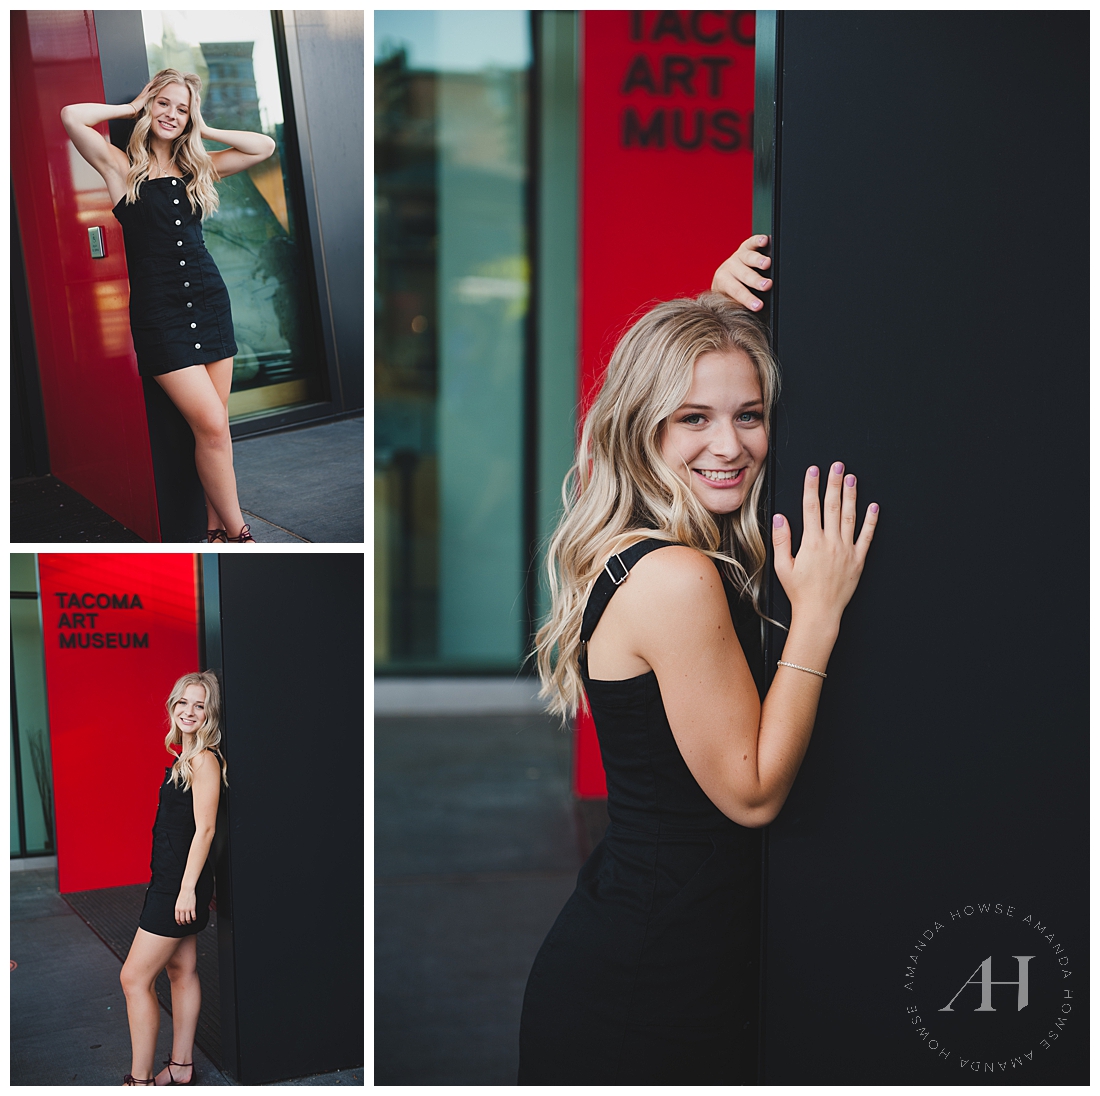 Artistic Senior Portraits with Red and Black Background | Senior Portrait Pose and Outfit Ideas | Photography by Amanda Howse